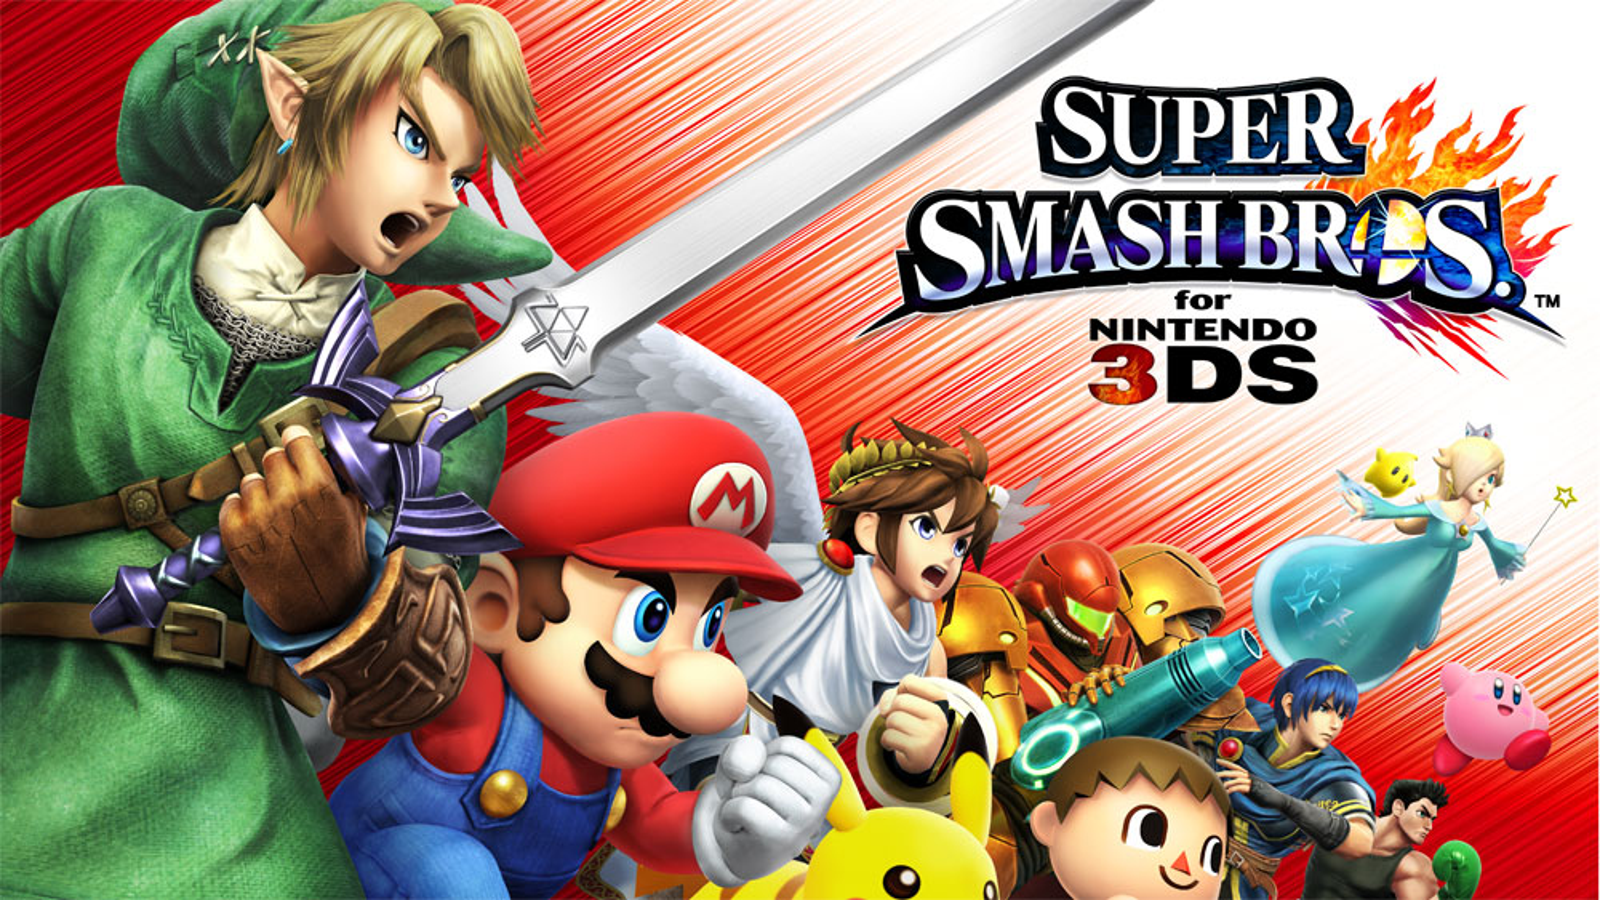 The First Super Smash Bros Game